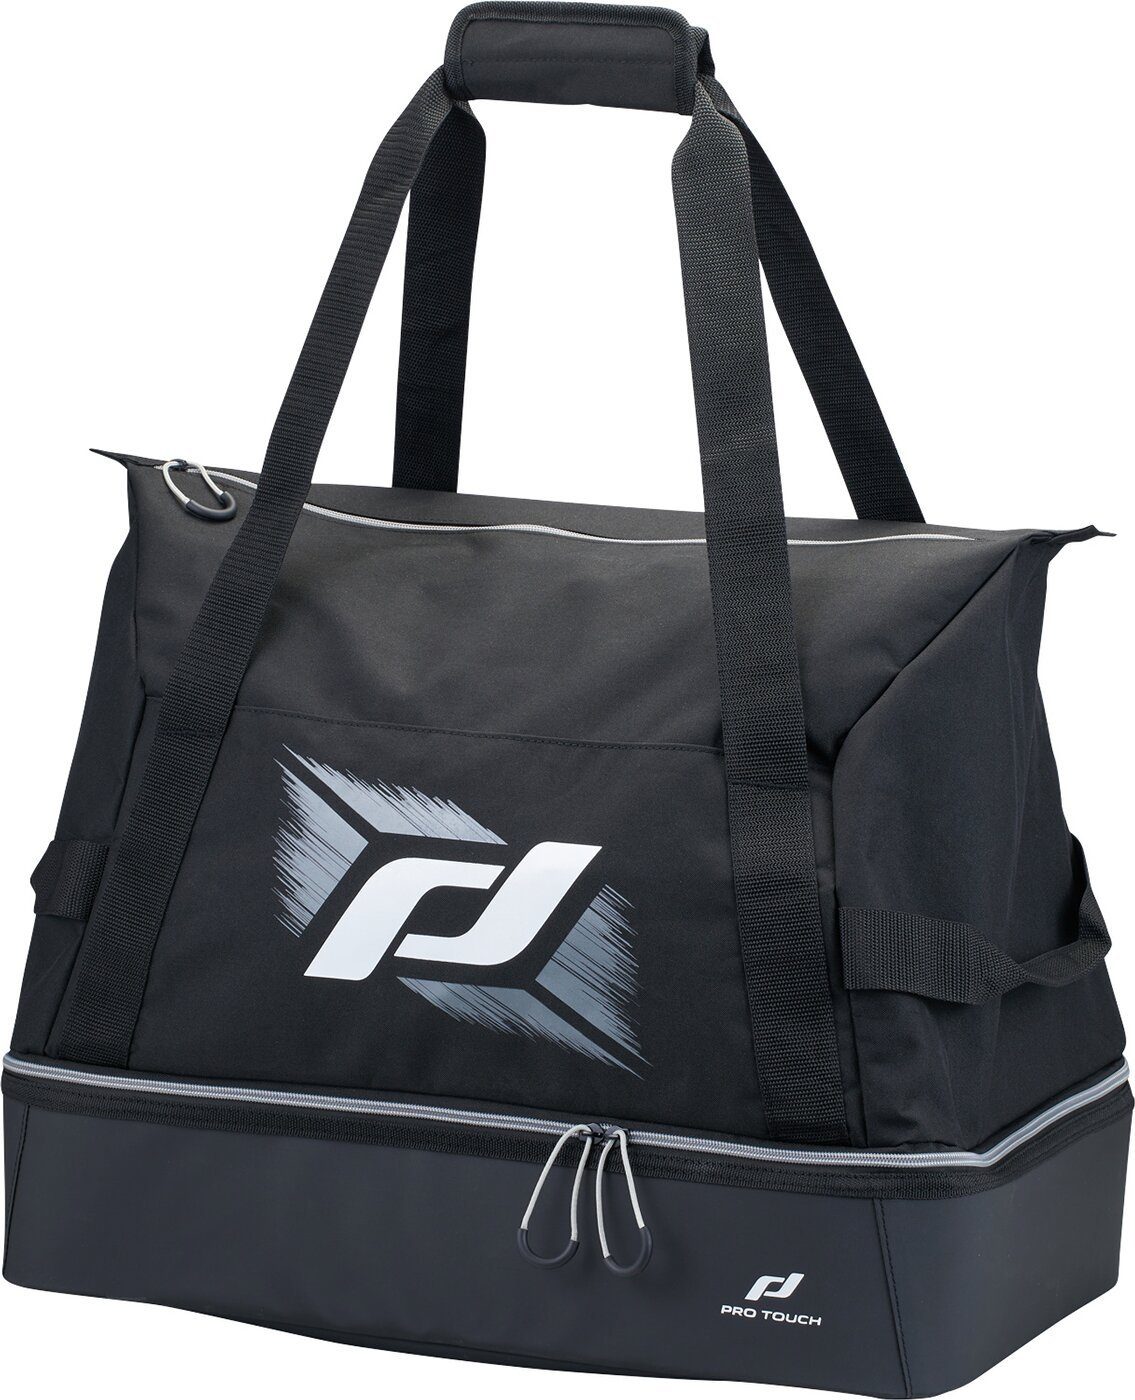 Force Pro 901 Pro Touch Sporttasche Bag Teambag M